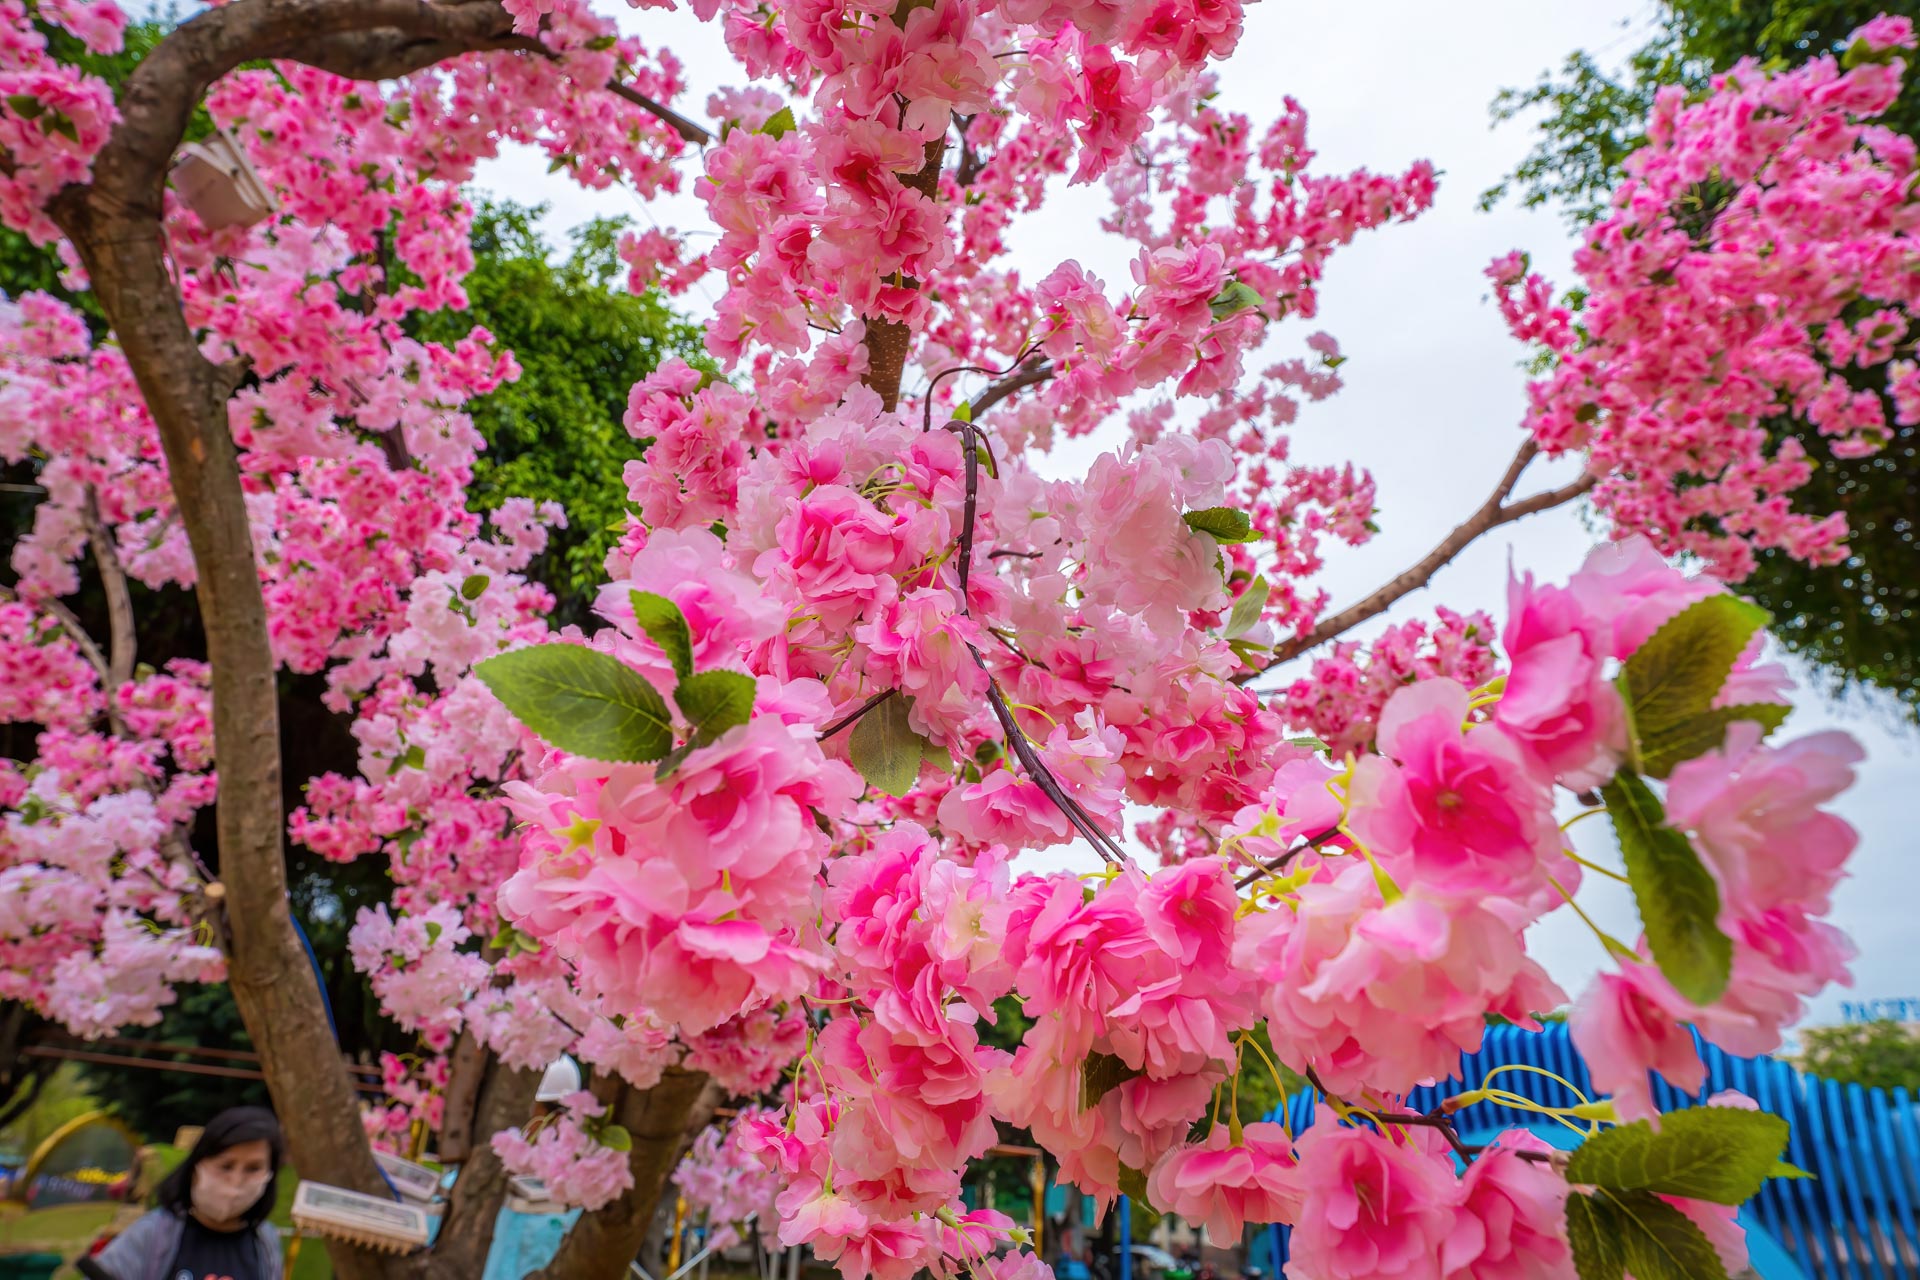 /fm/Files//Pictures/Ido Uploads(1)/Asia/Vietnam/All/Tet Festival Pink Blossoms Bloom Lunar Year - NS - SS.jpg